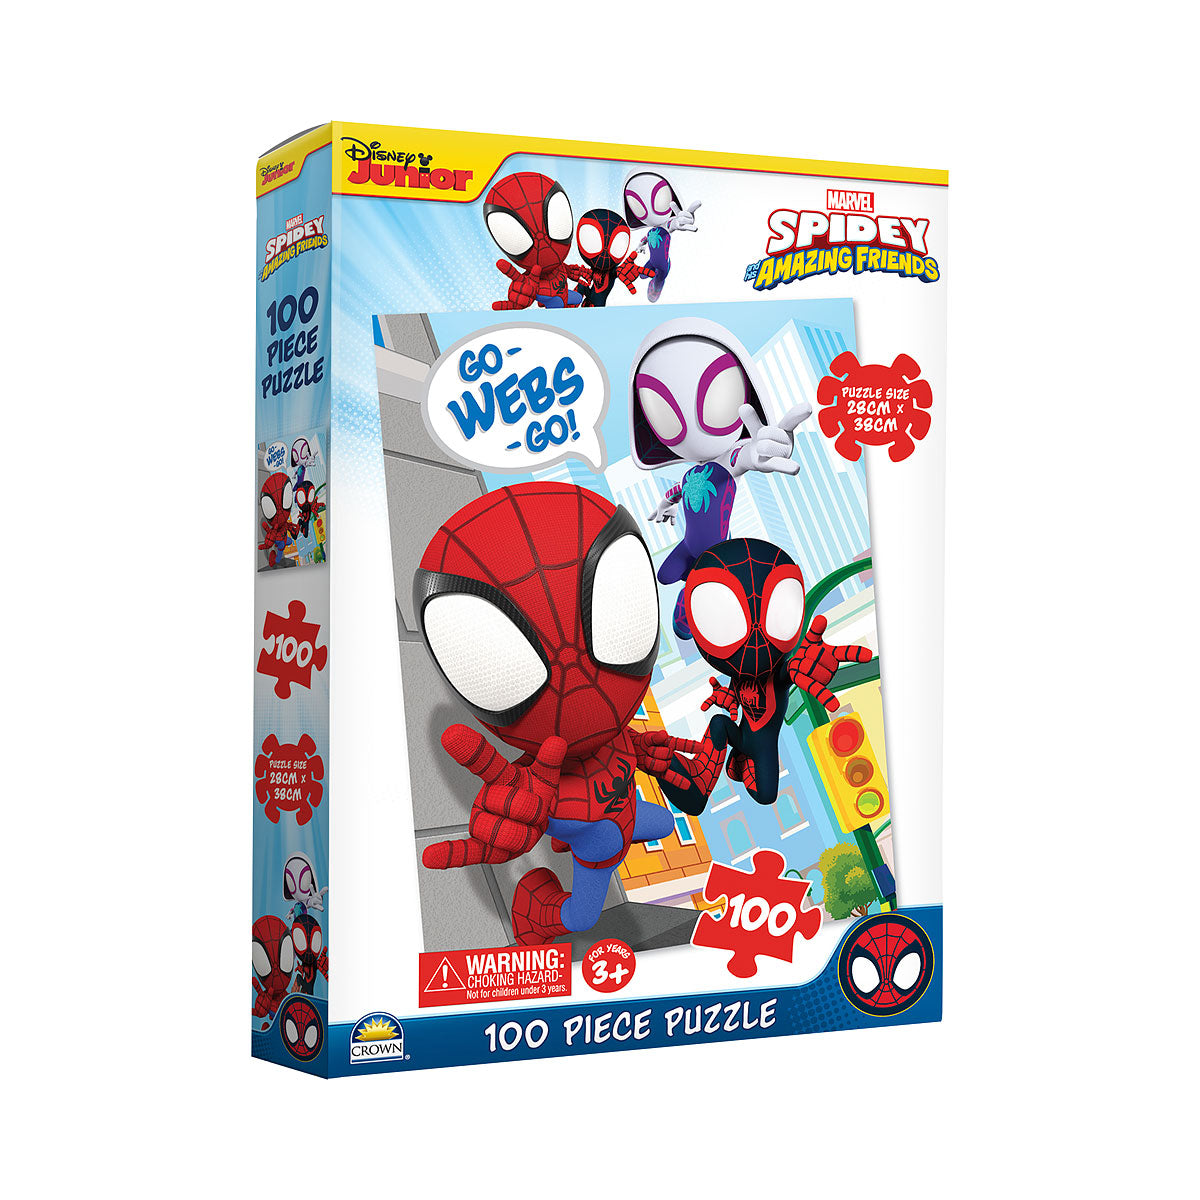 Disney Junior Marvel Spider-Man Spidey Amazing Friends - Set of 5 Wood  Puzzles with Storage Box for Kids - Ages 4 and Up